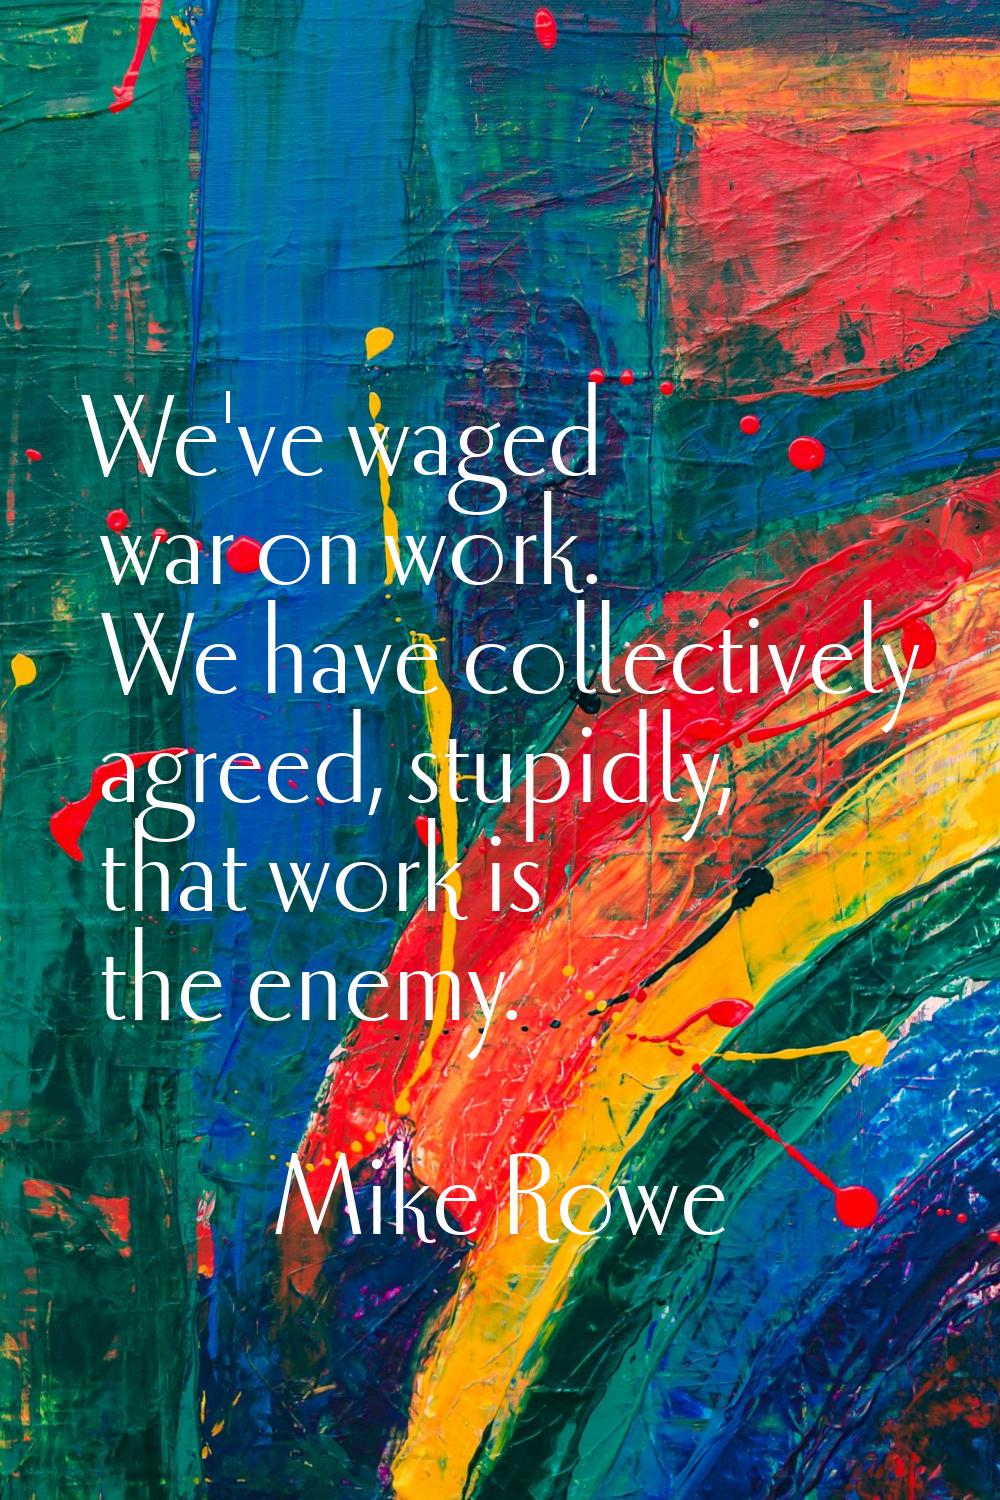 We've waged war on work. We have collectively agreed, stupidly, that work is the enemy.